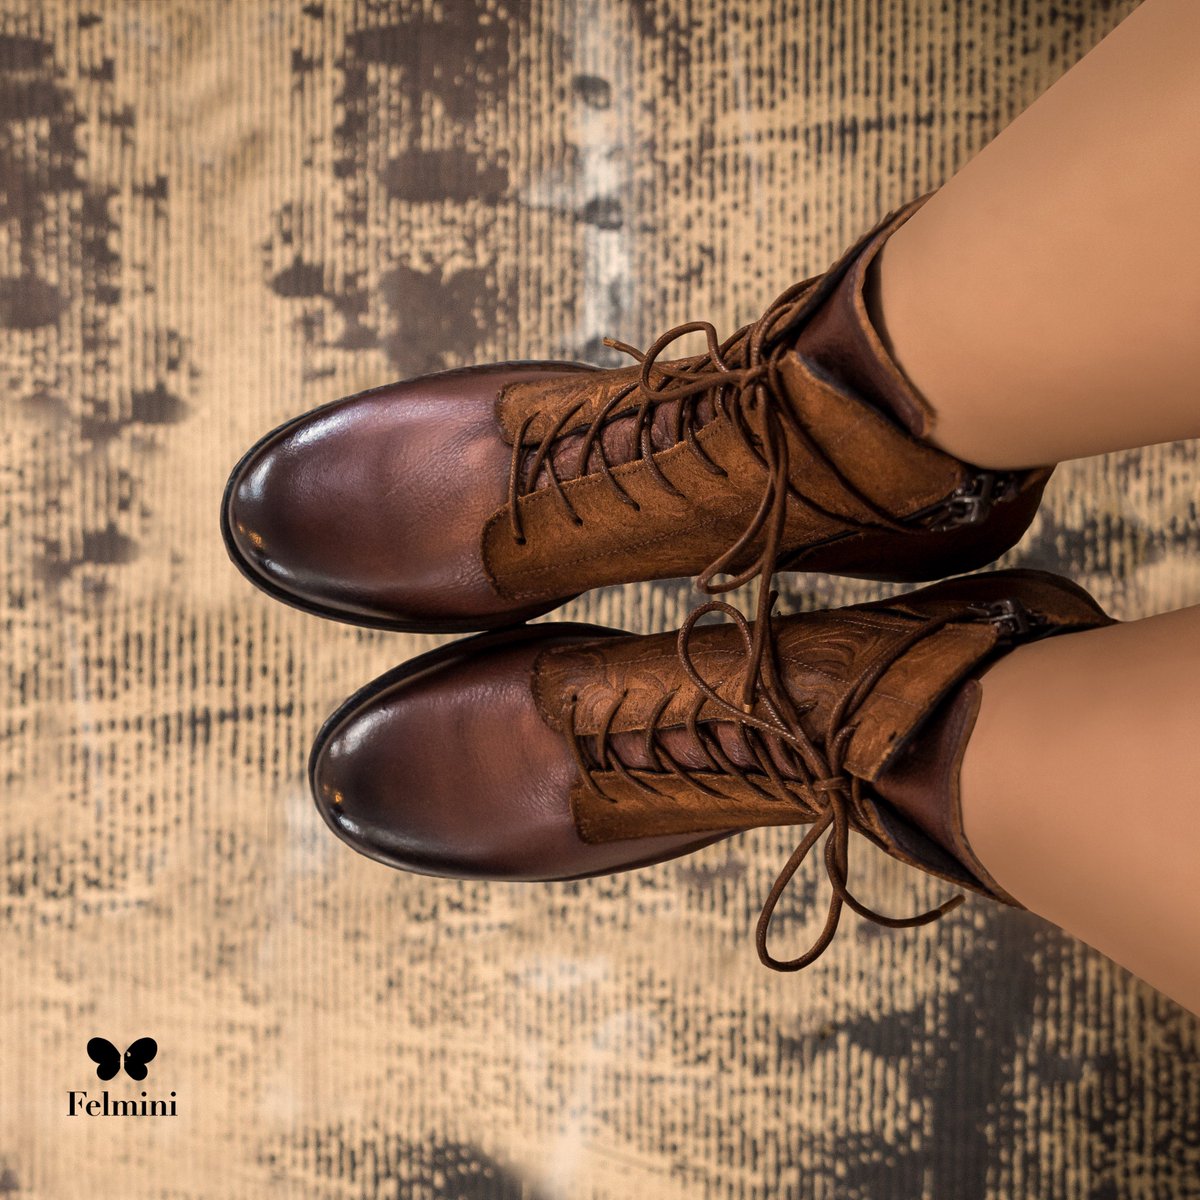 Felmini Shoes on Twitter: "Be the kind of woman that when your feet hit the each morning, the world trembles! 👀💥 #felmini #felminishoes #gianiB288 https://t.co/QYXUaYK5OP" / X